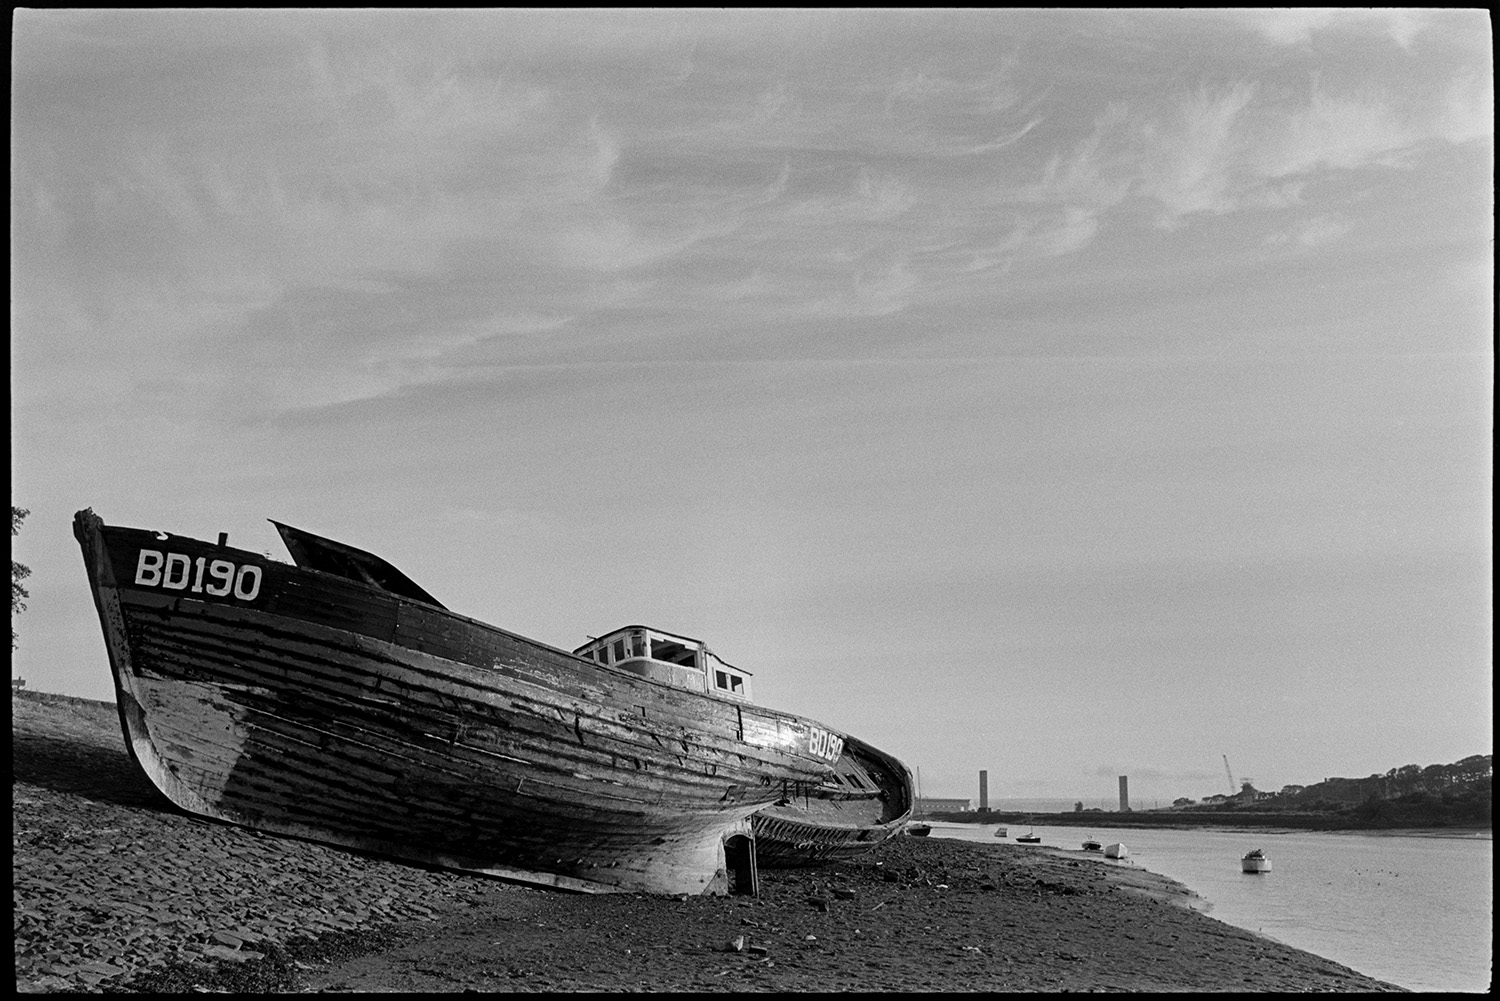 Abandoned wooden fishing boats shortly before they were cut up. The last ? 
[Two wooden fishing boats on the banks of the River Torridge at Bideford before they were cut up. Possibly the last of their kind. The number of the boat in the foreground is BD190. The pillars of Bideford New Bridge under construction can be seen in the background.]